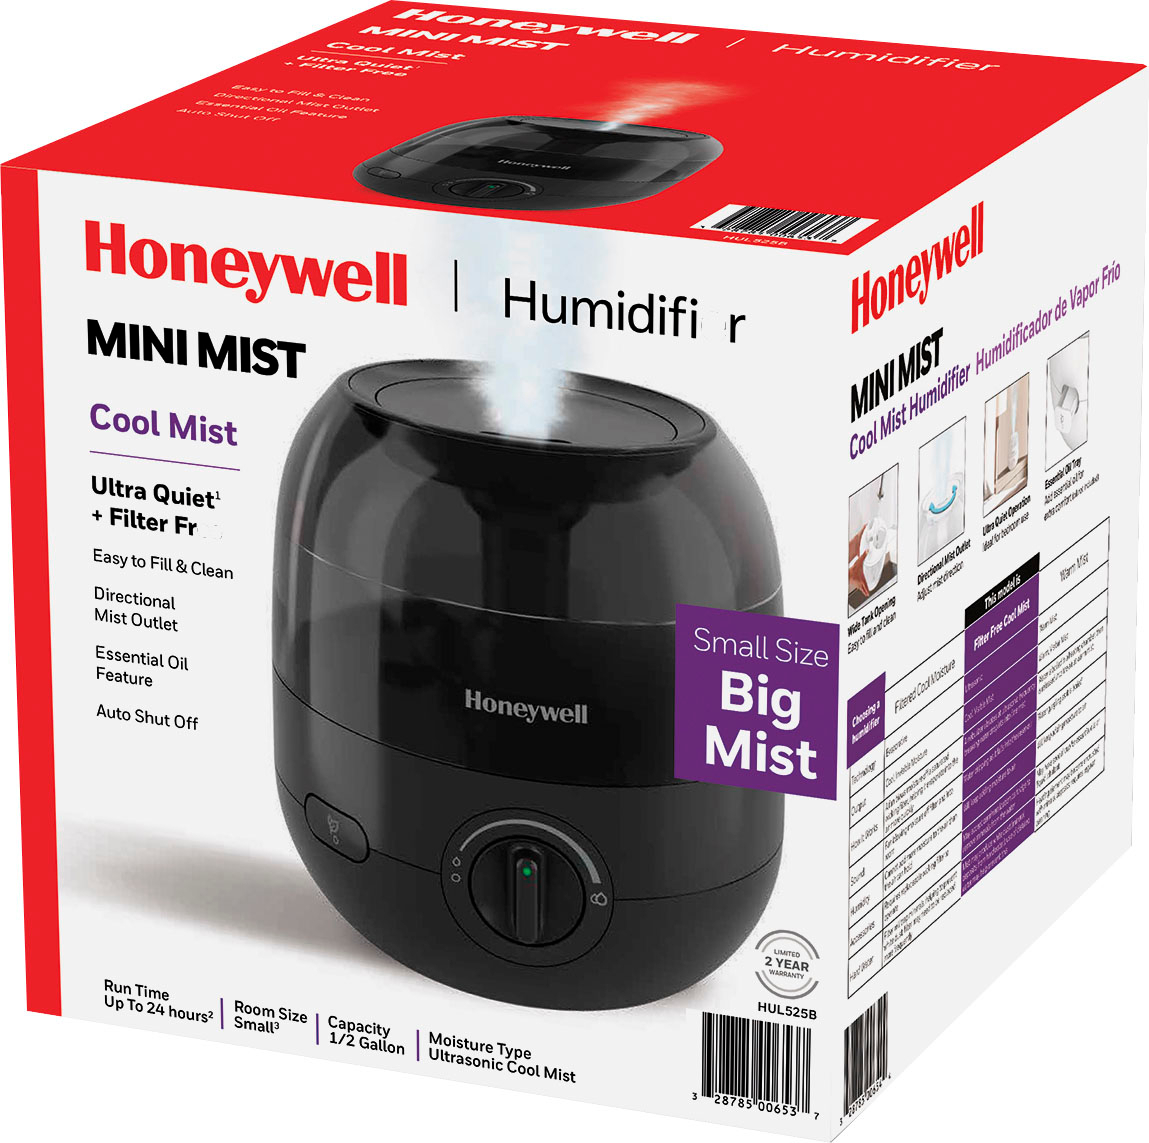 Honeywell Cool Mist Humidifier Electronic Controls 1.5 Gallon with